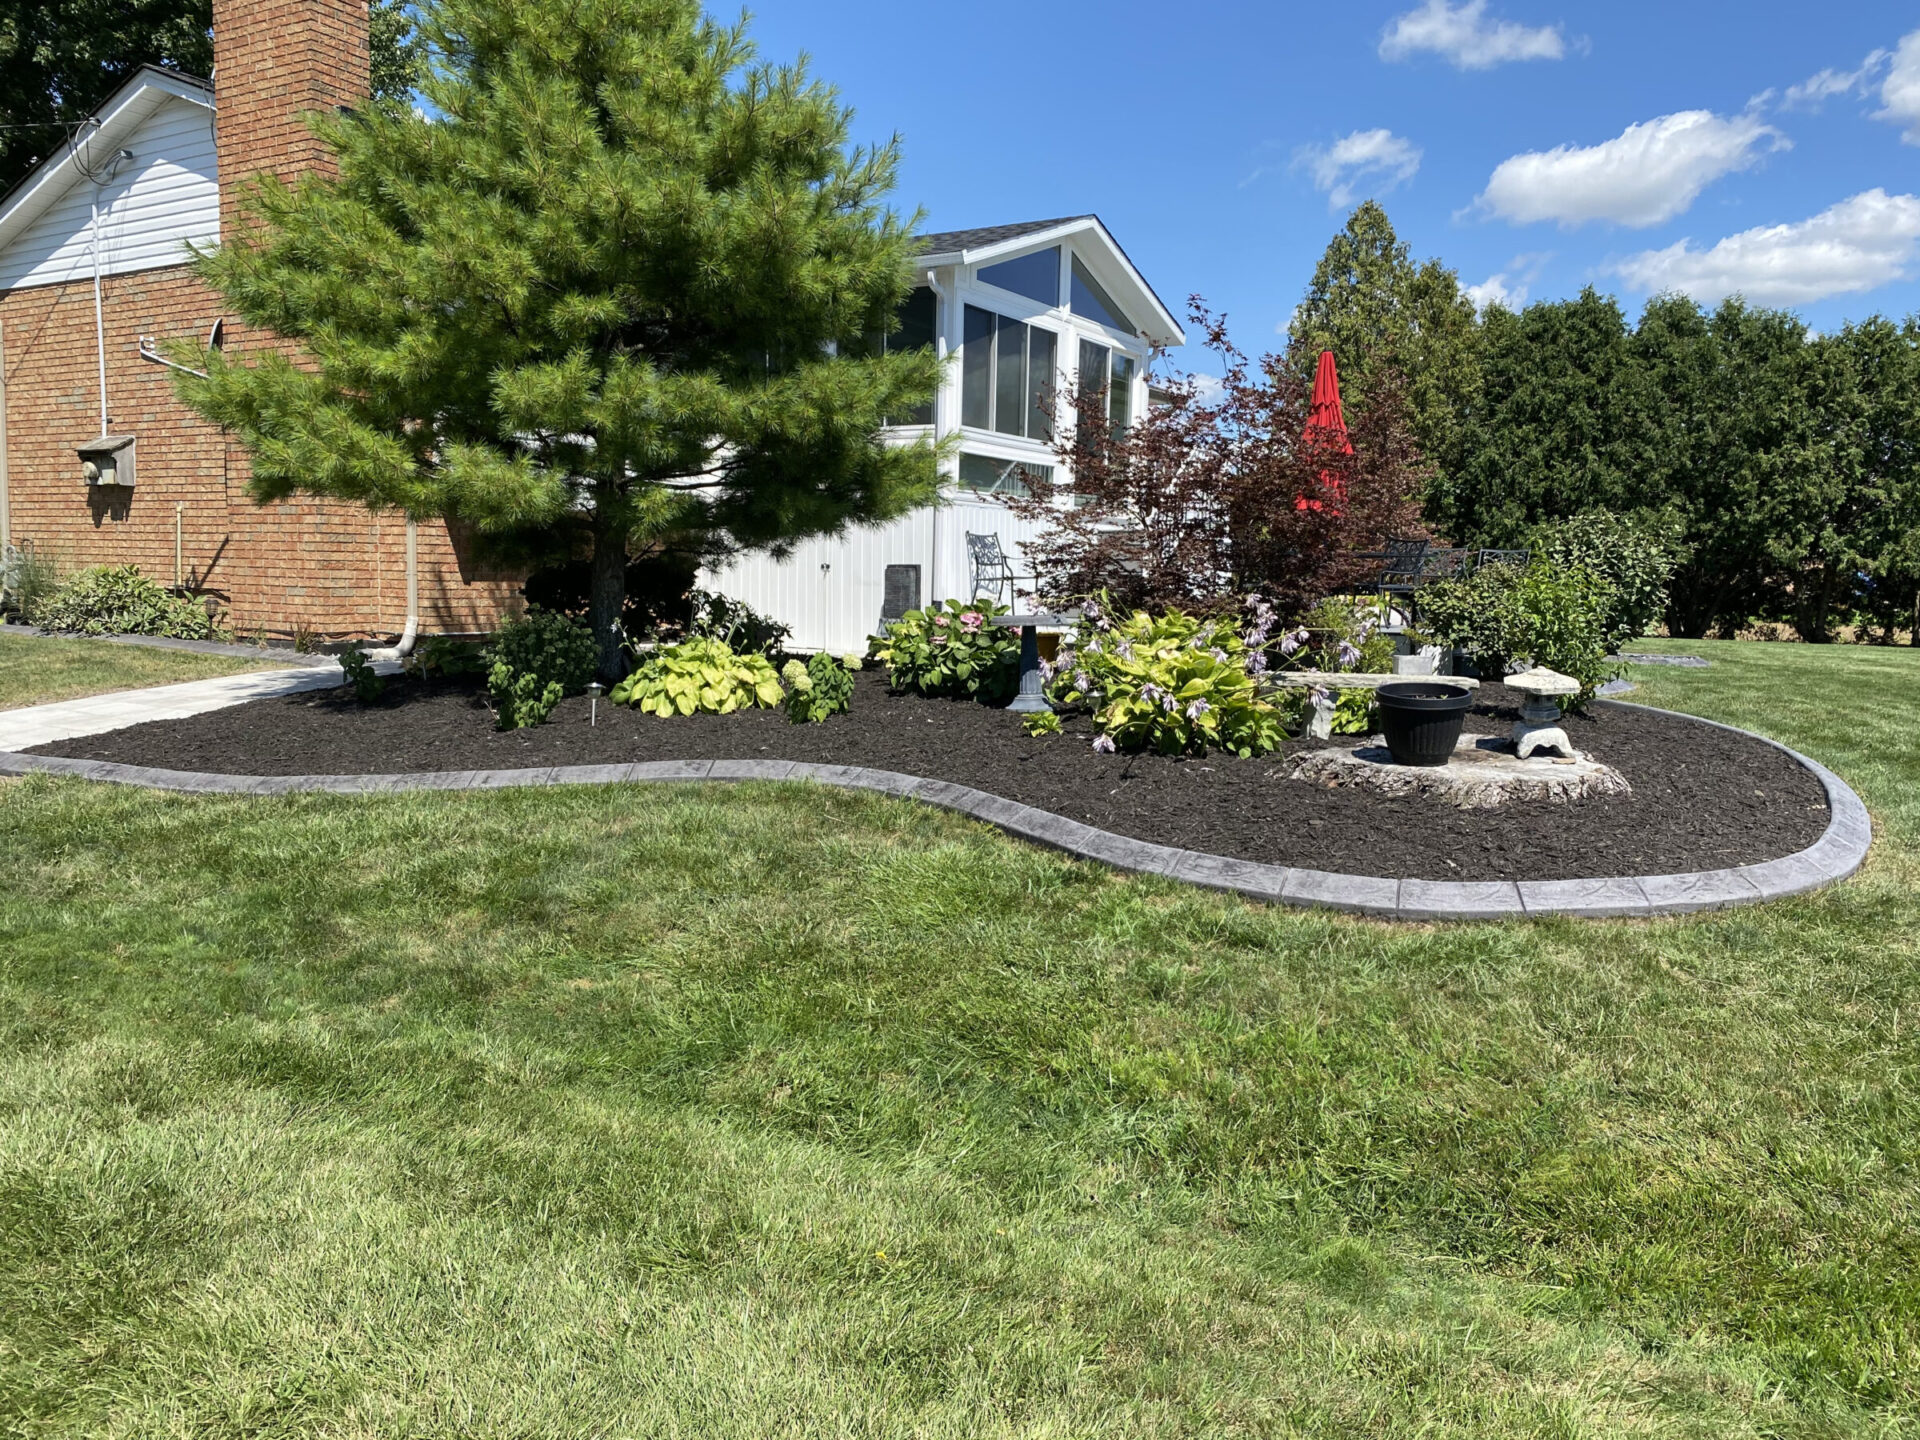 This image shows a neatly landscaped yard with lush green grass, decorative shrubs, mulched garden beds, and a curved border pathway under a clear blue sky.